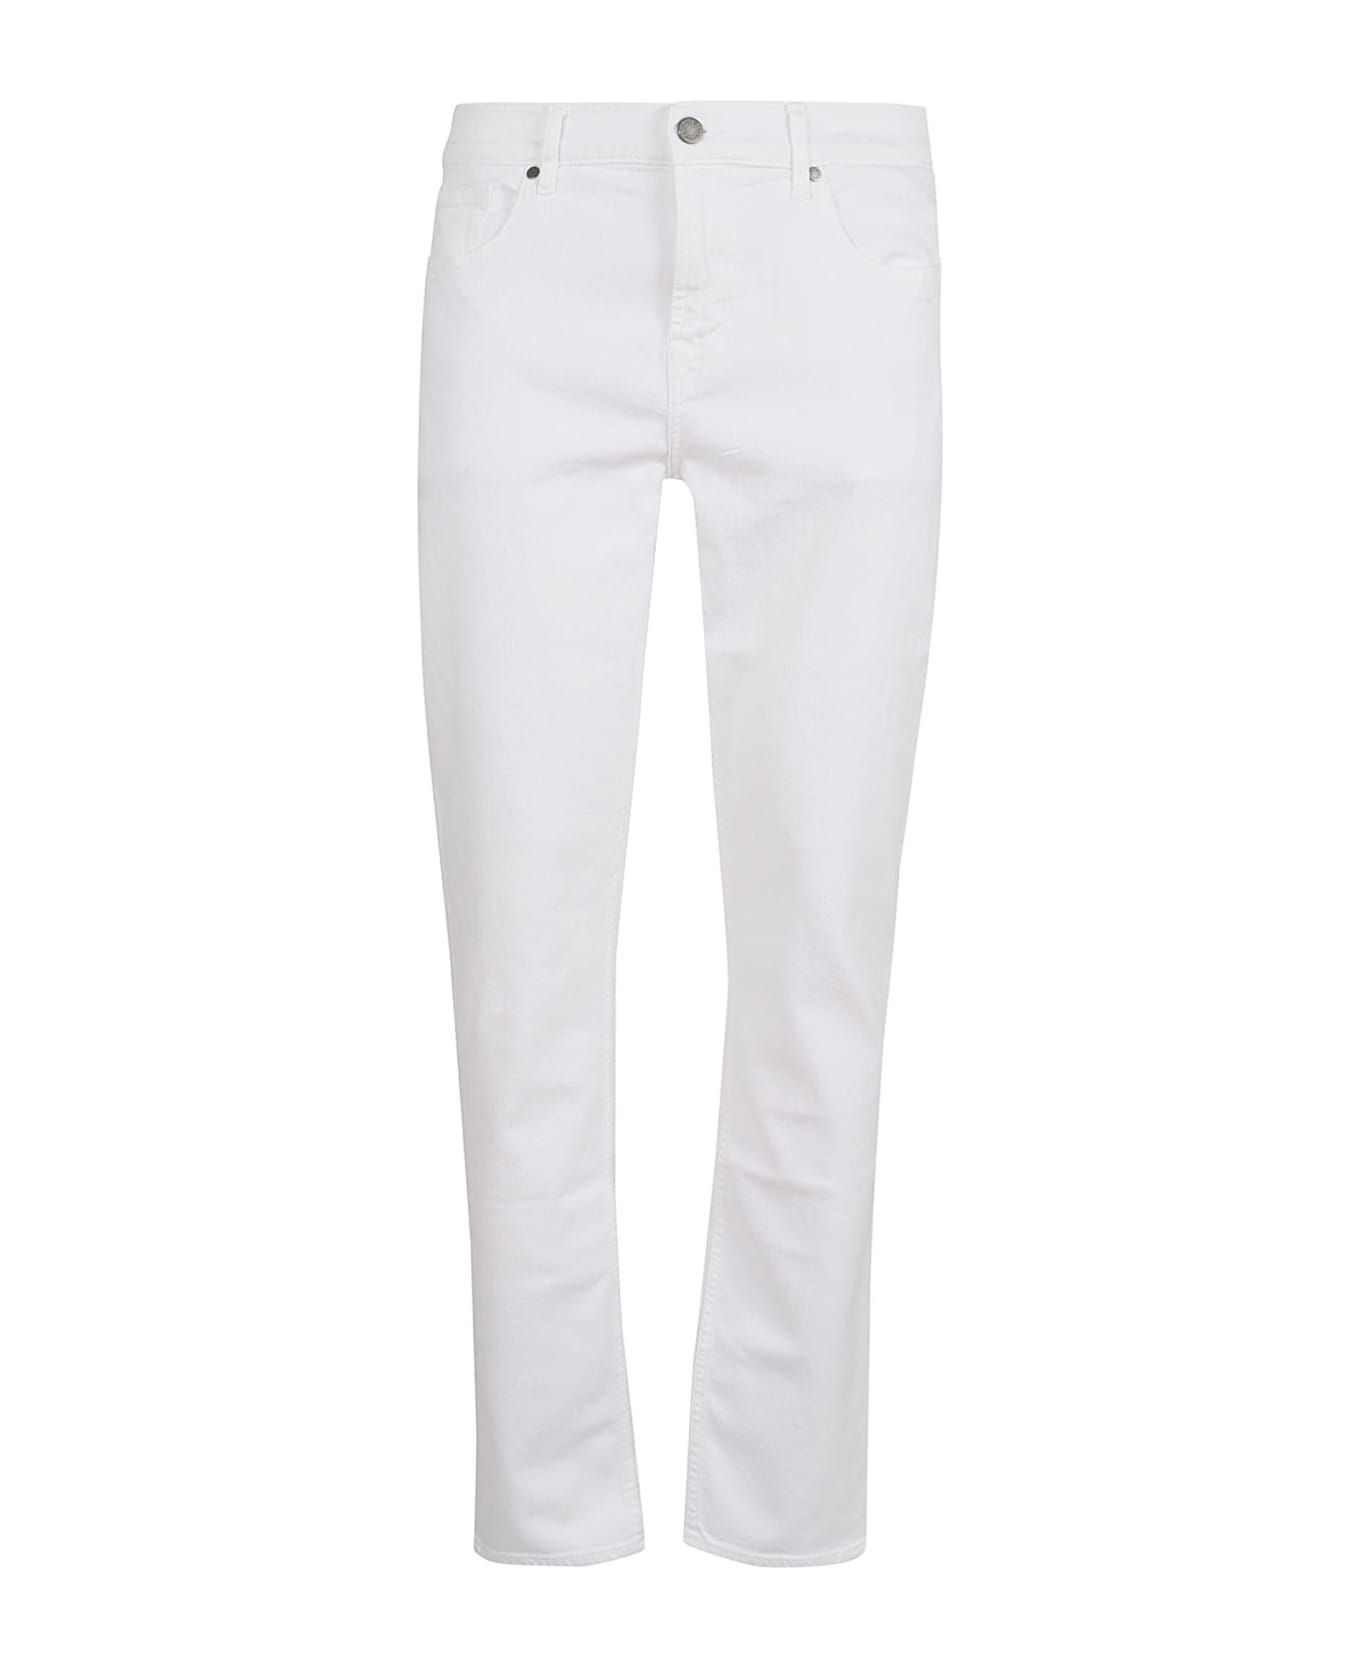 7 For All Mankind Slimmy Luxe Performance White - White